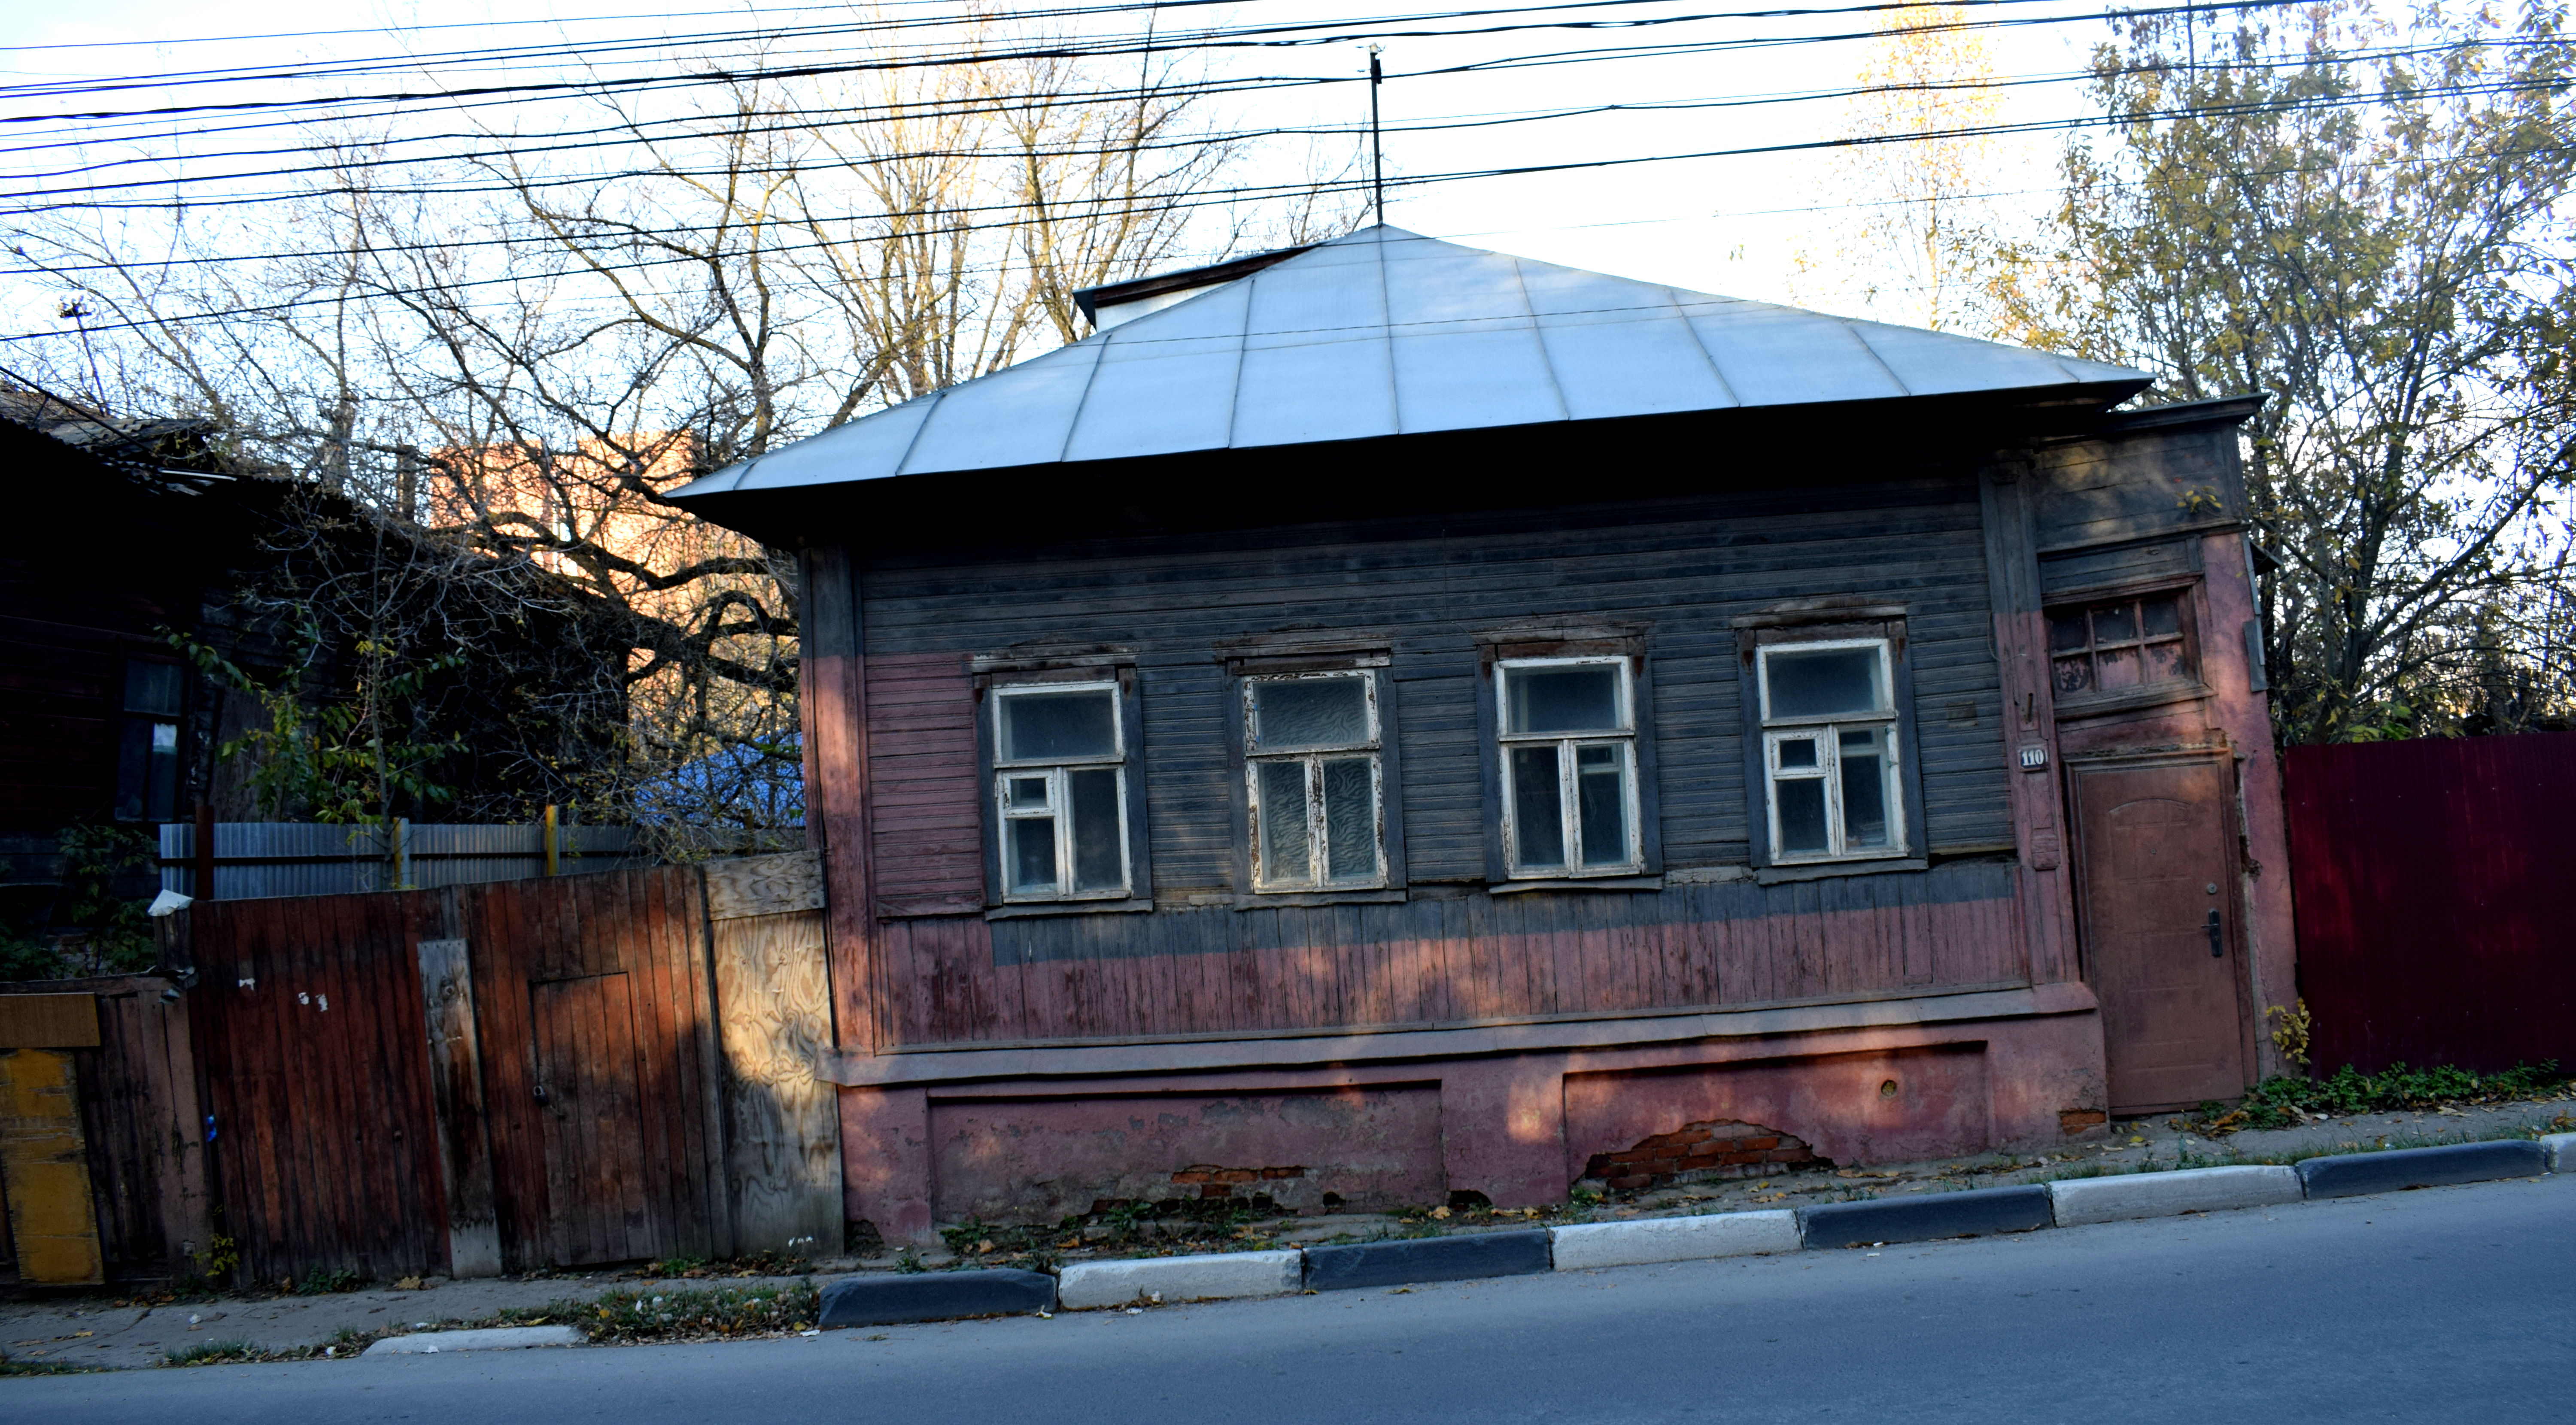 Tula Old Wooden House Russia 